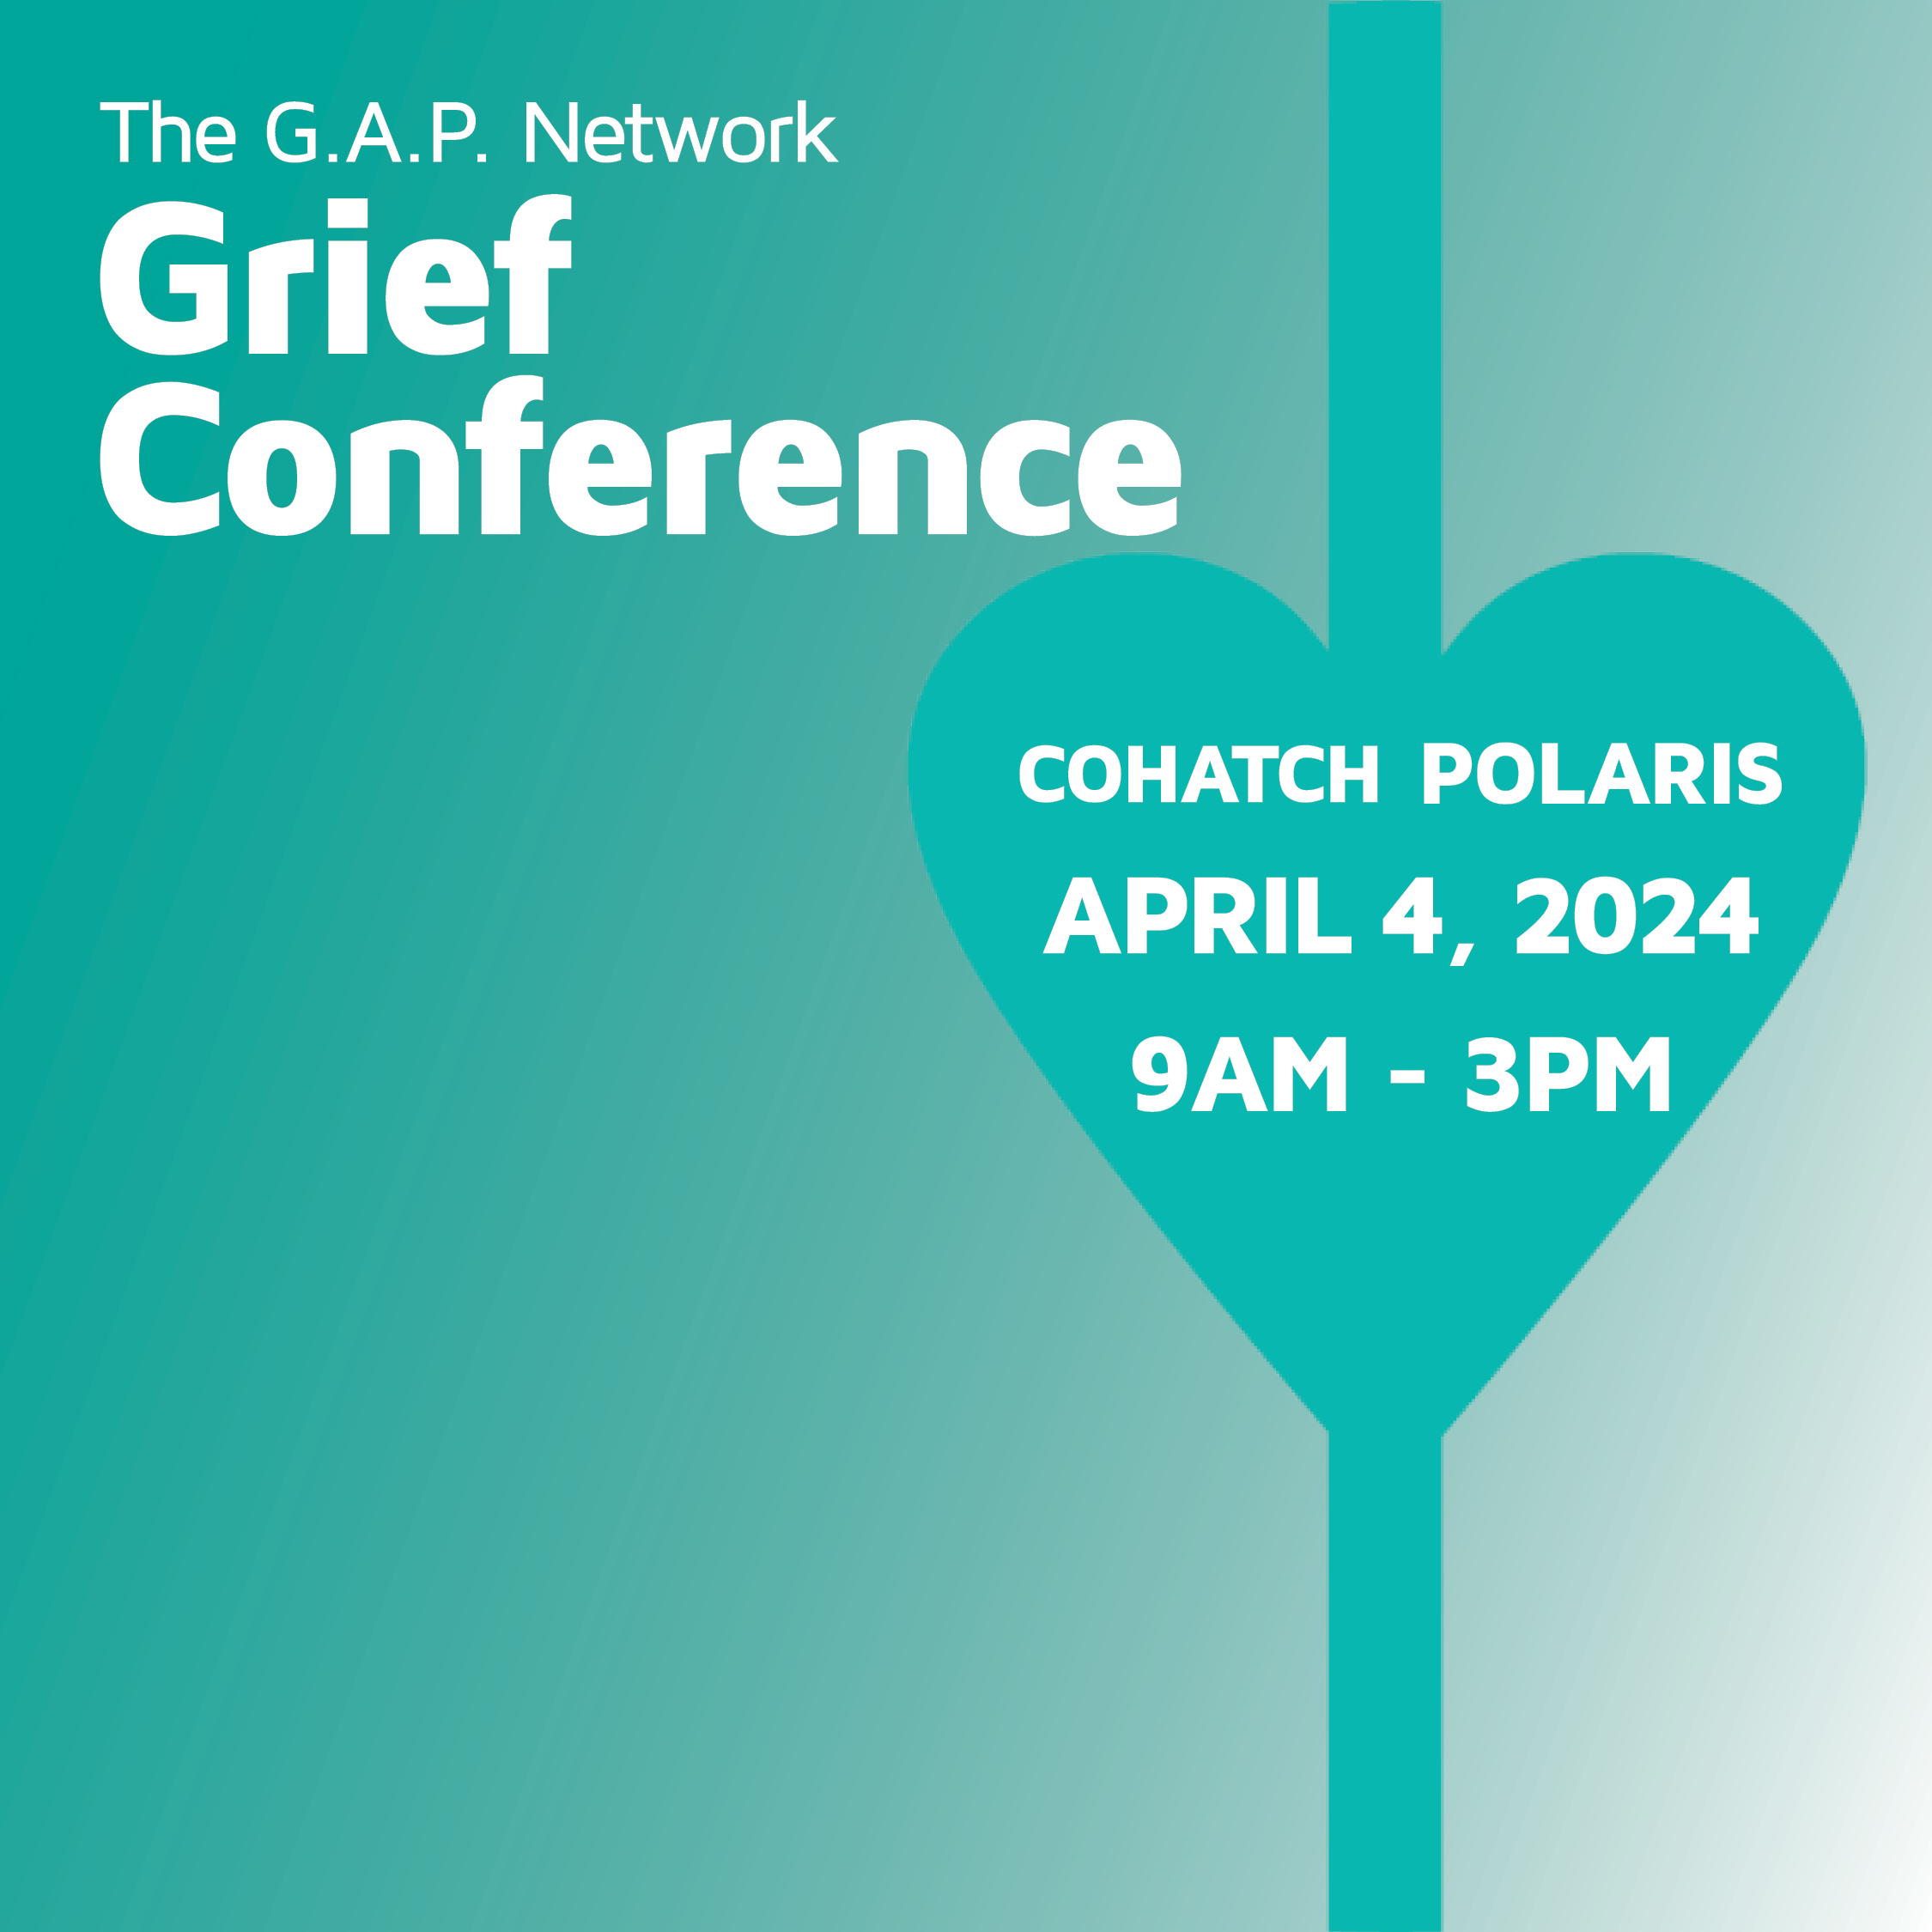 The G.A.P. Network Grief Conference